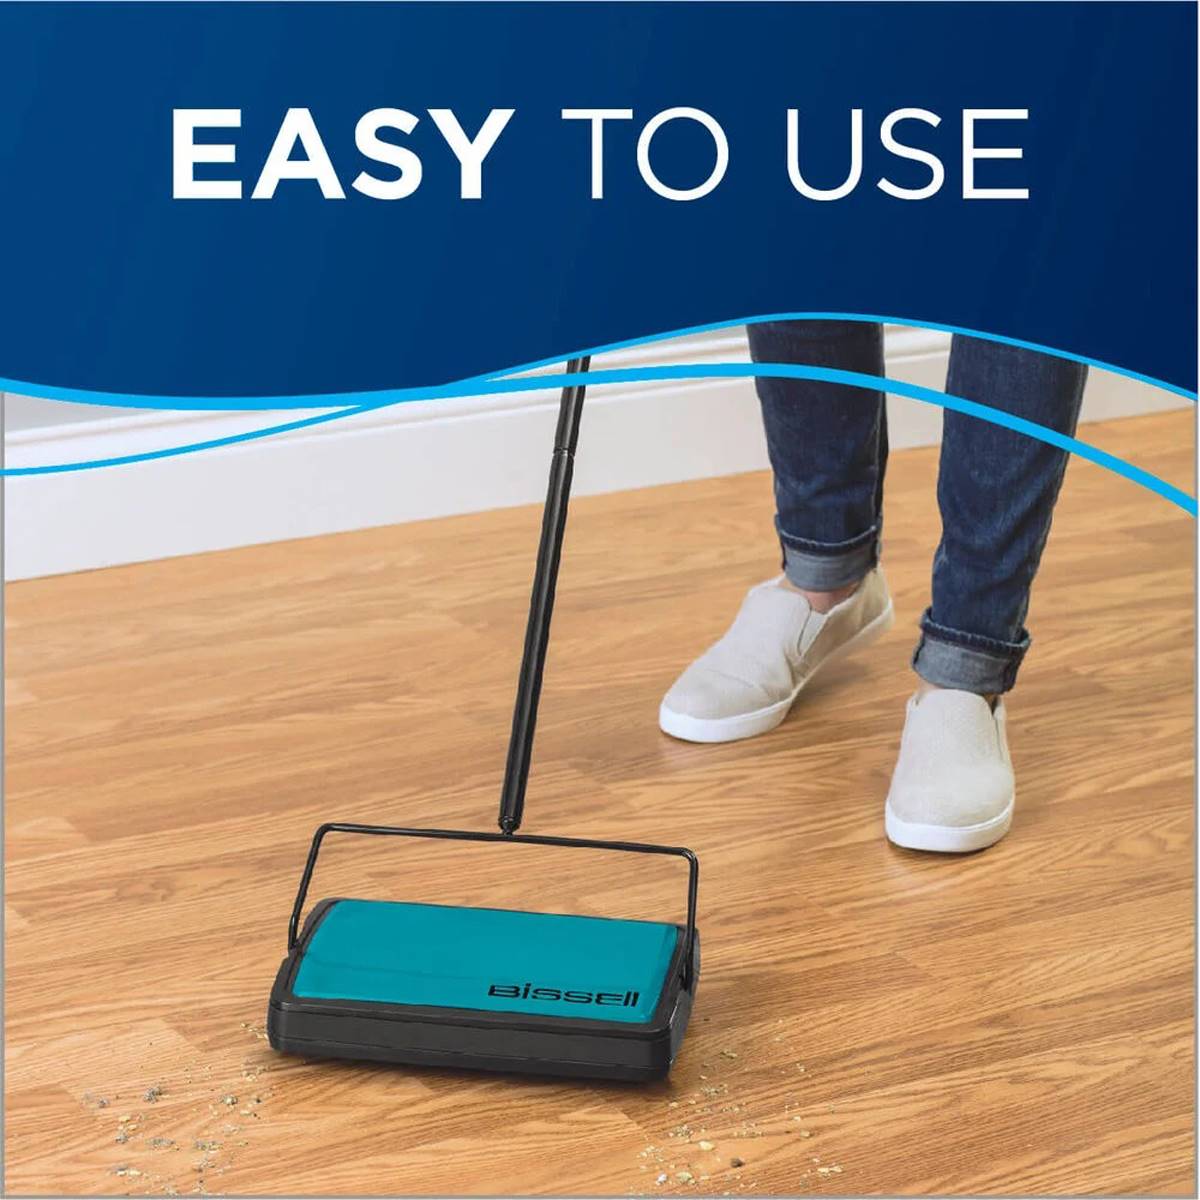 Bissell(R) Easy Sweep Compact Manual Sweeper